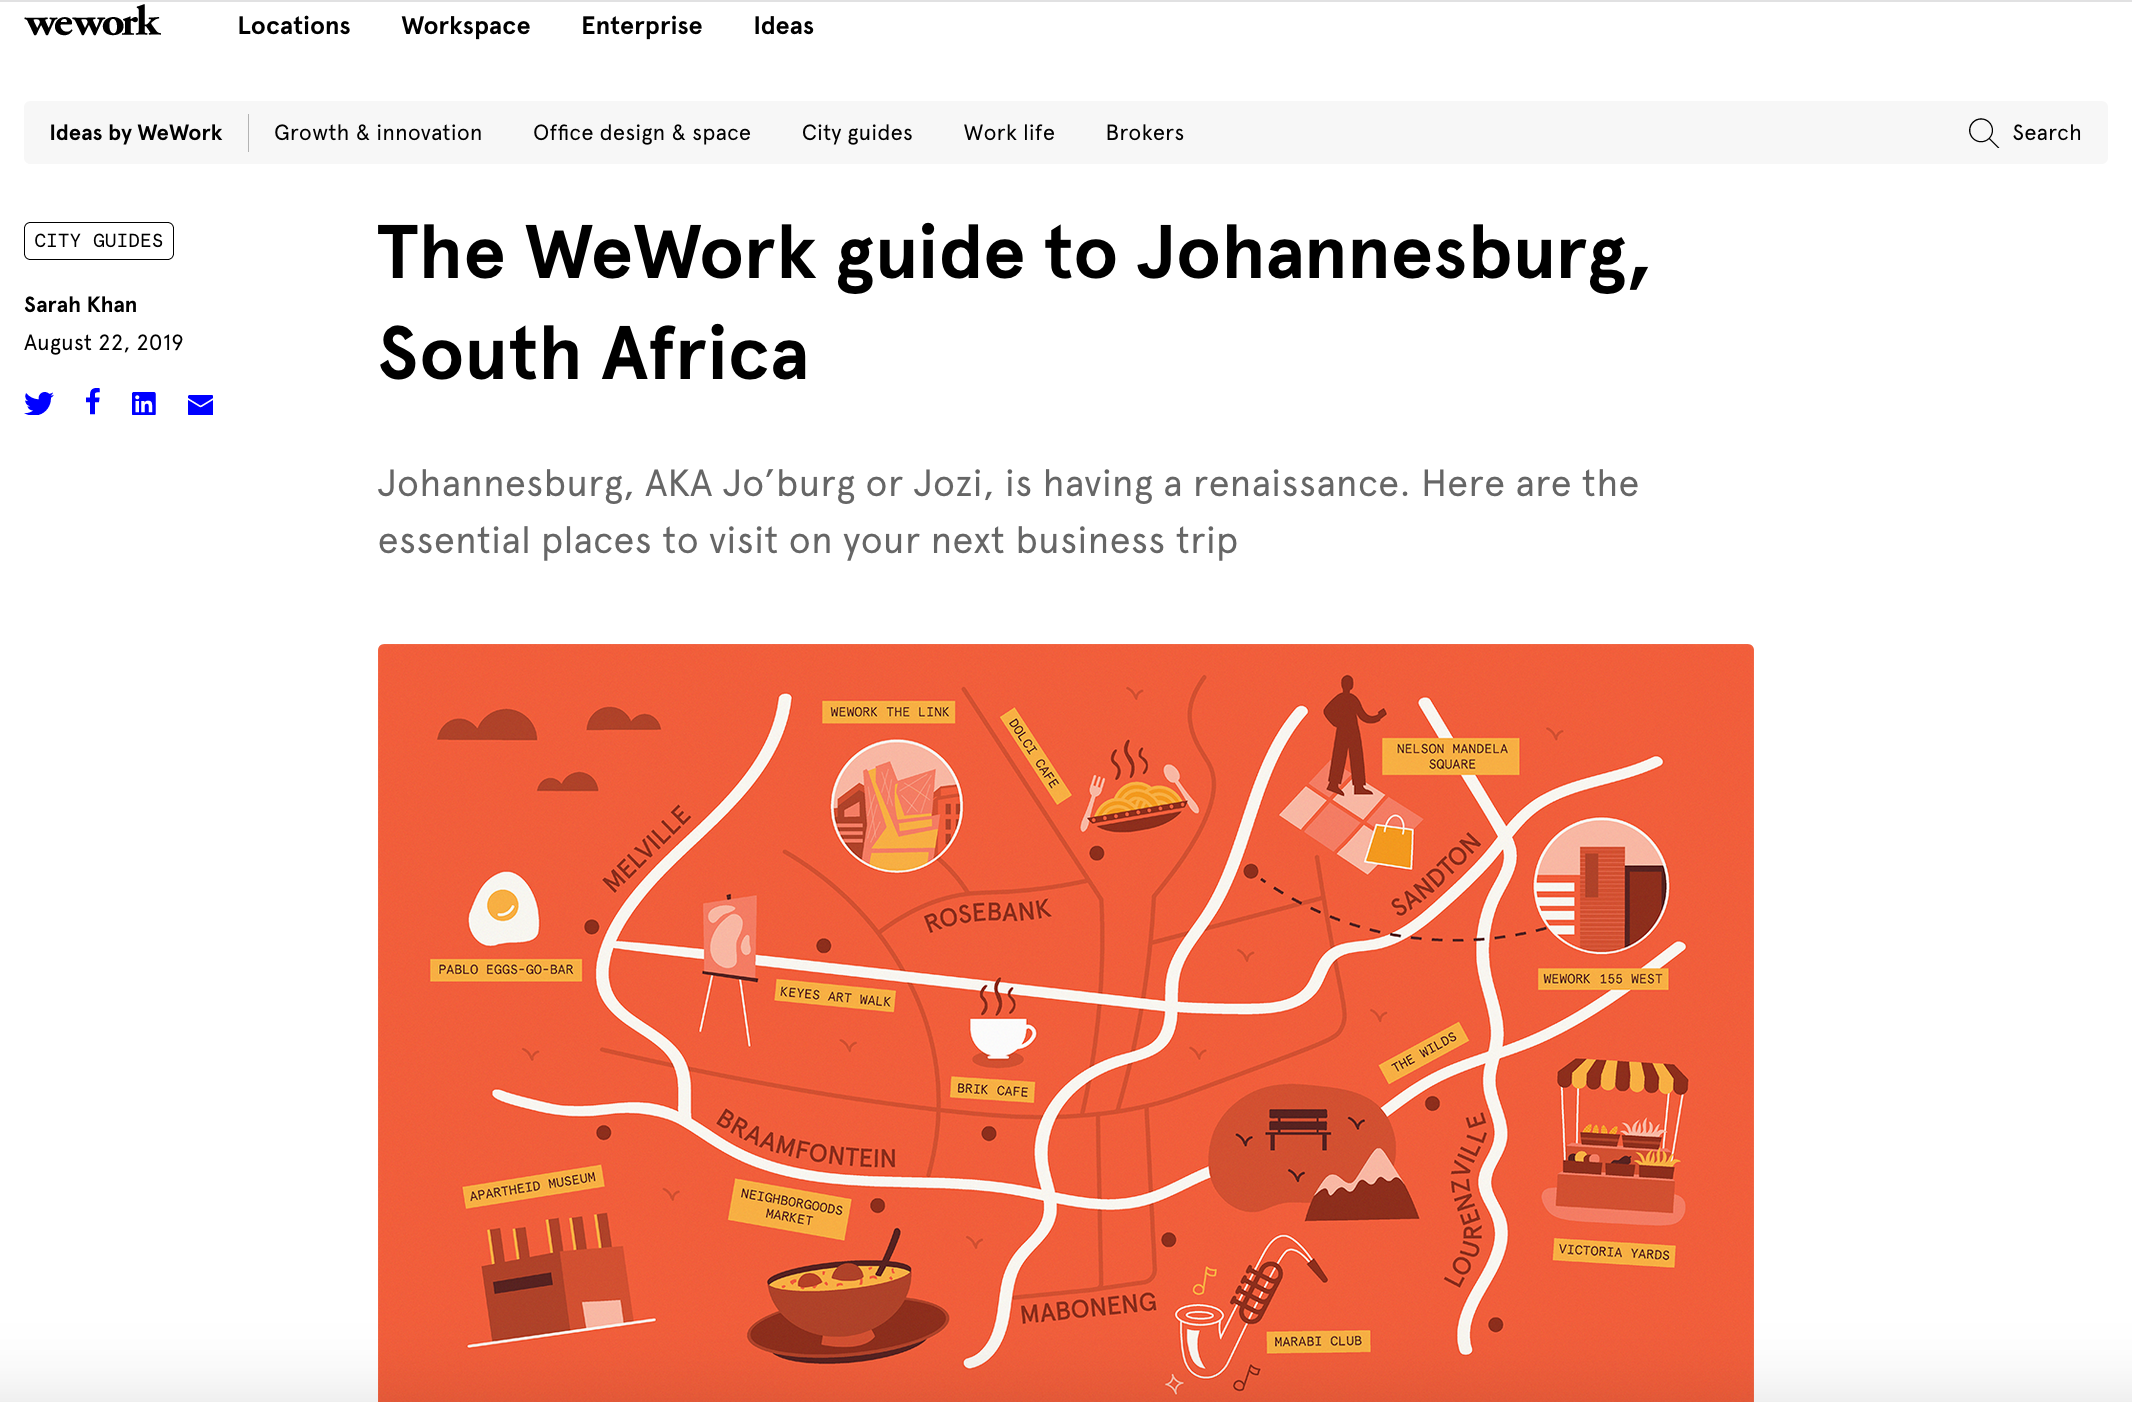 WeWork: The WeWork Guide to Johannesburg, South Africa